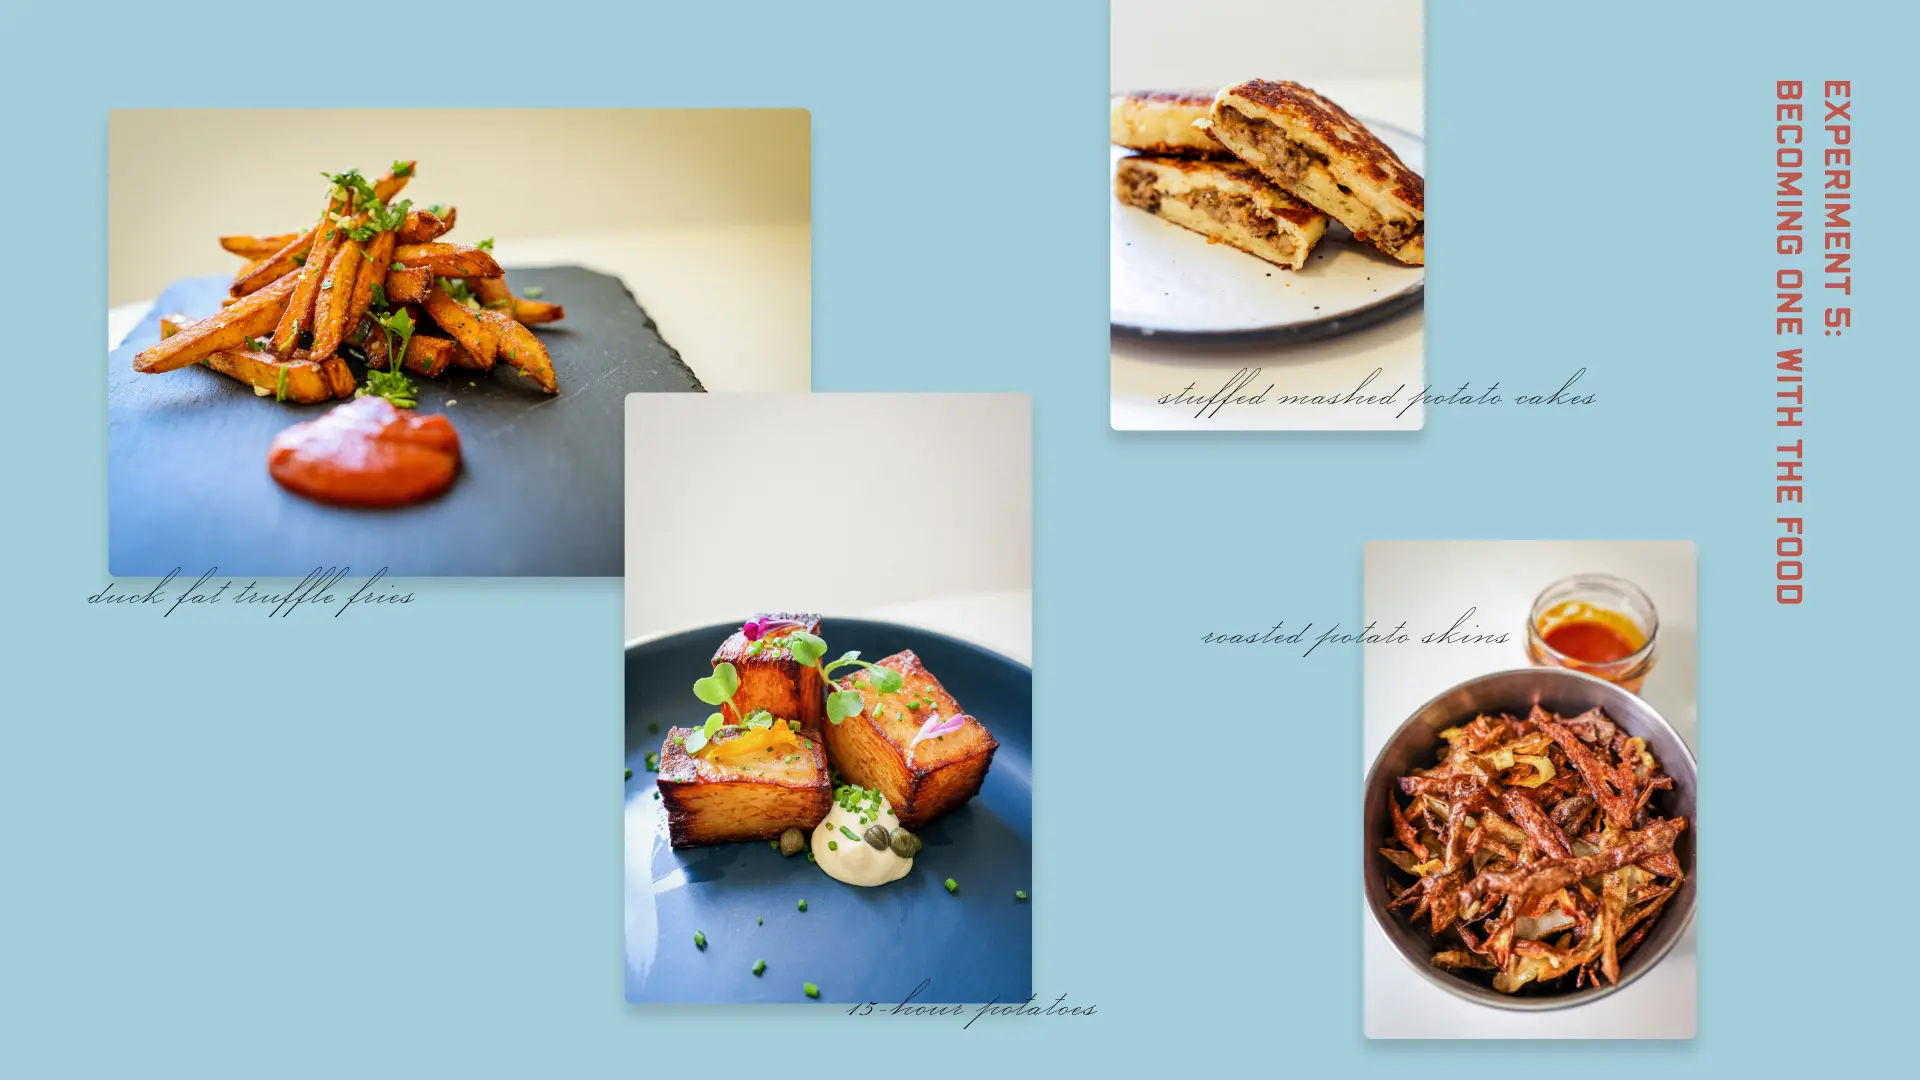 Four photographs of food on a light blue background. Clockwise from left: French fries and a mound of ketchup on a black platter three cubes of potato with a mound of aioli on blue plate, three potato cakes on white plate, and roasted potato skin slices in a stainless steel bowl.